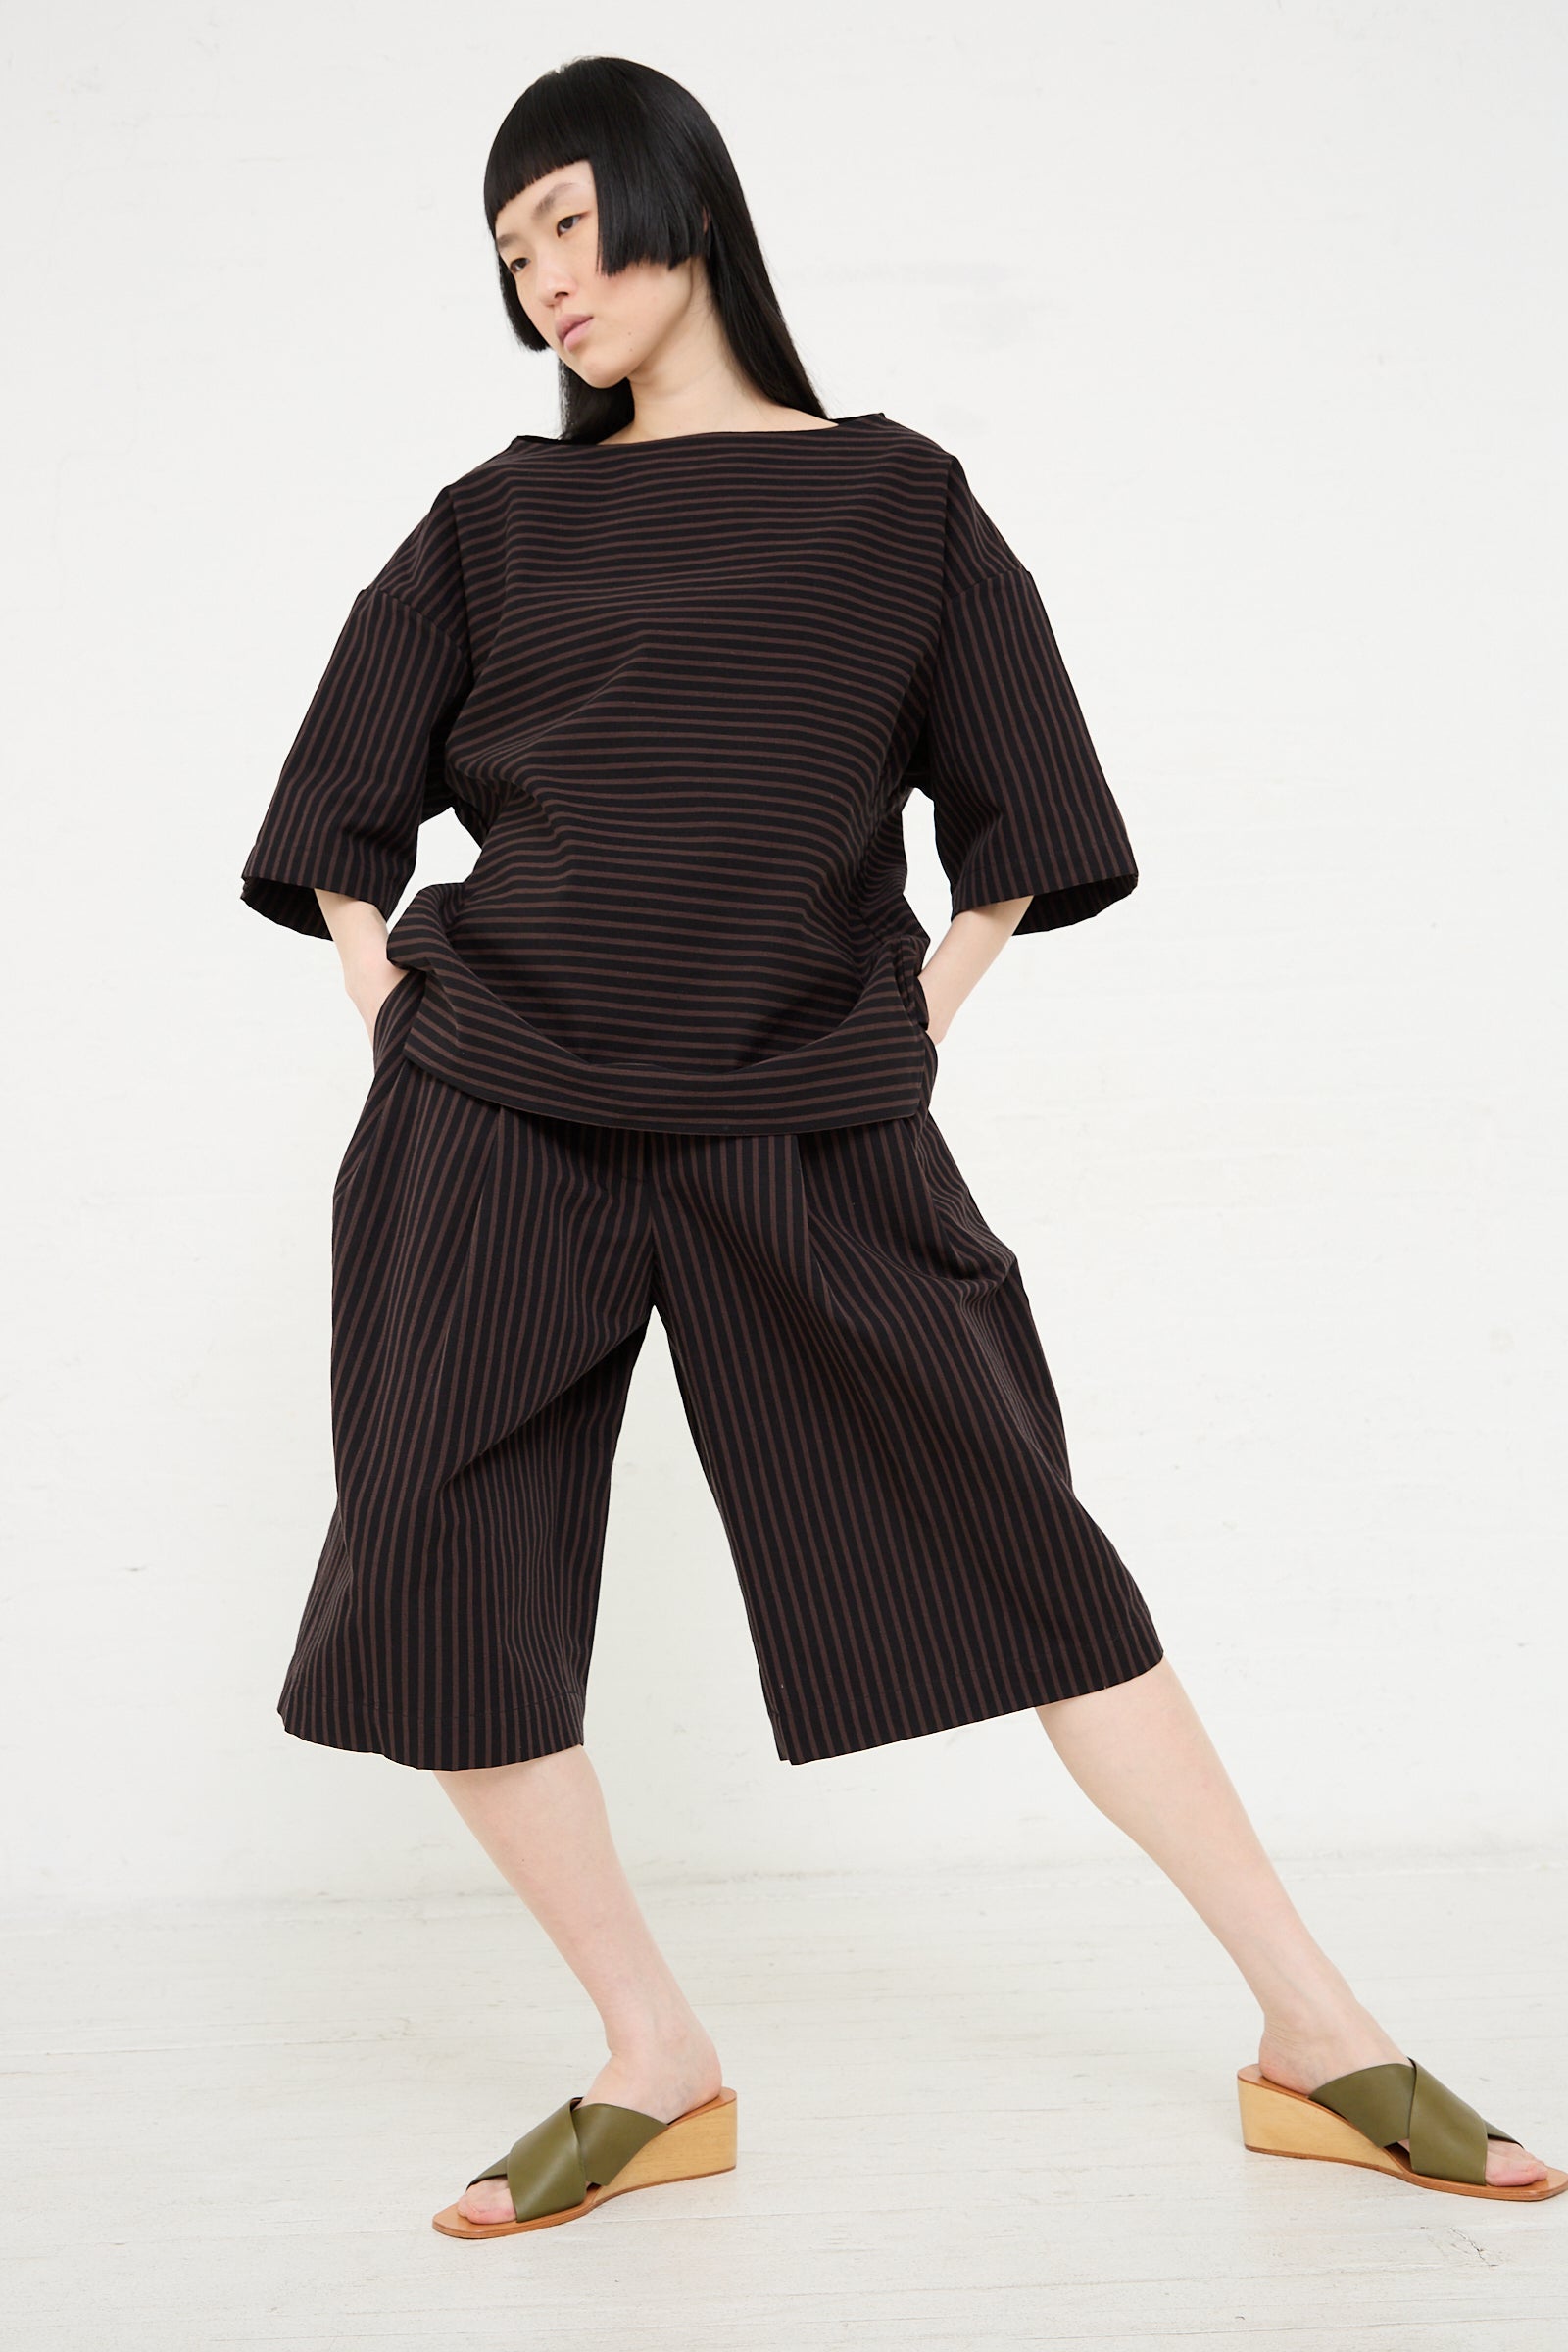 A woman posing in a Melio Short in Black and brown striped Bermuda top outfit made from a cotton/linen blend, paired with olive green sandals by Rachel Comey.